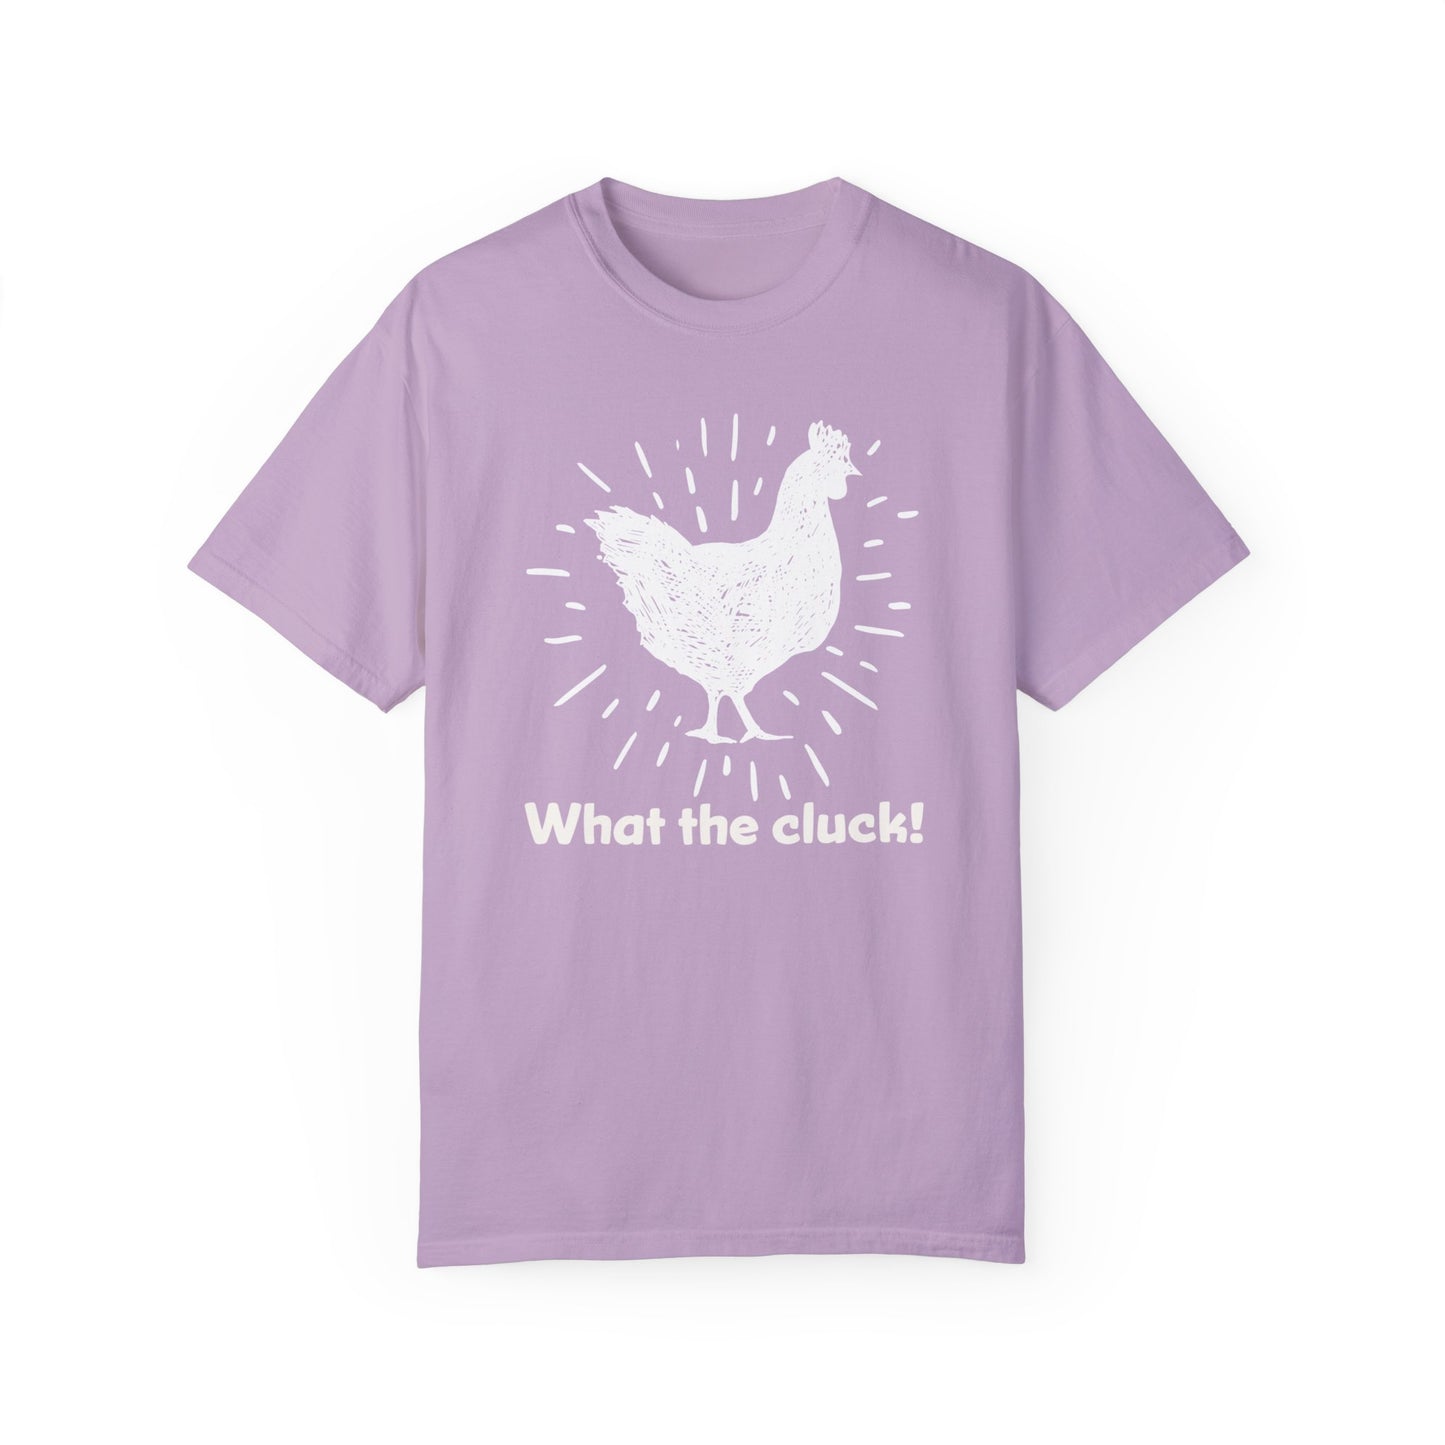 What the Cluck T-Shirt For Chicken T Shirt For Funny Hen TShirt For Barnyard Chic Tee